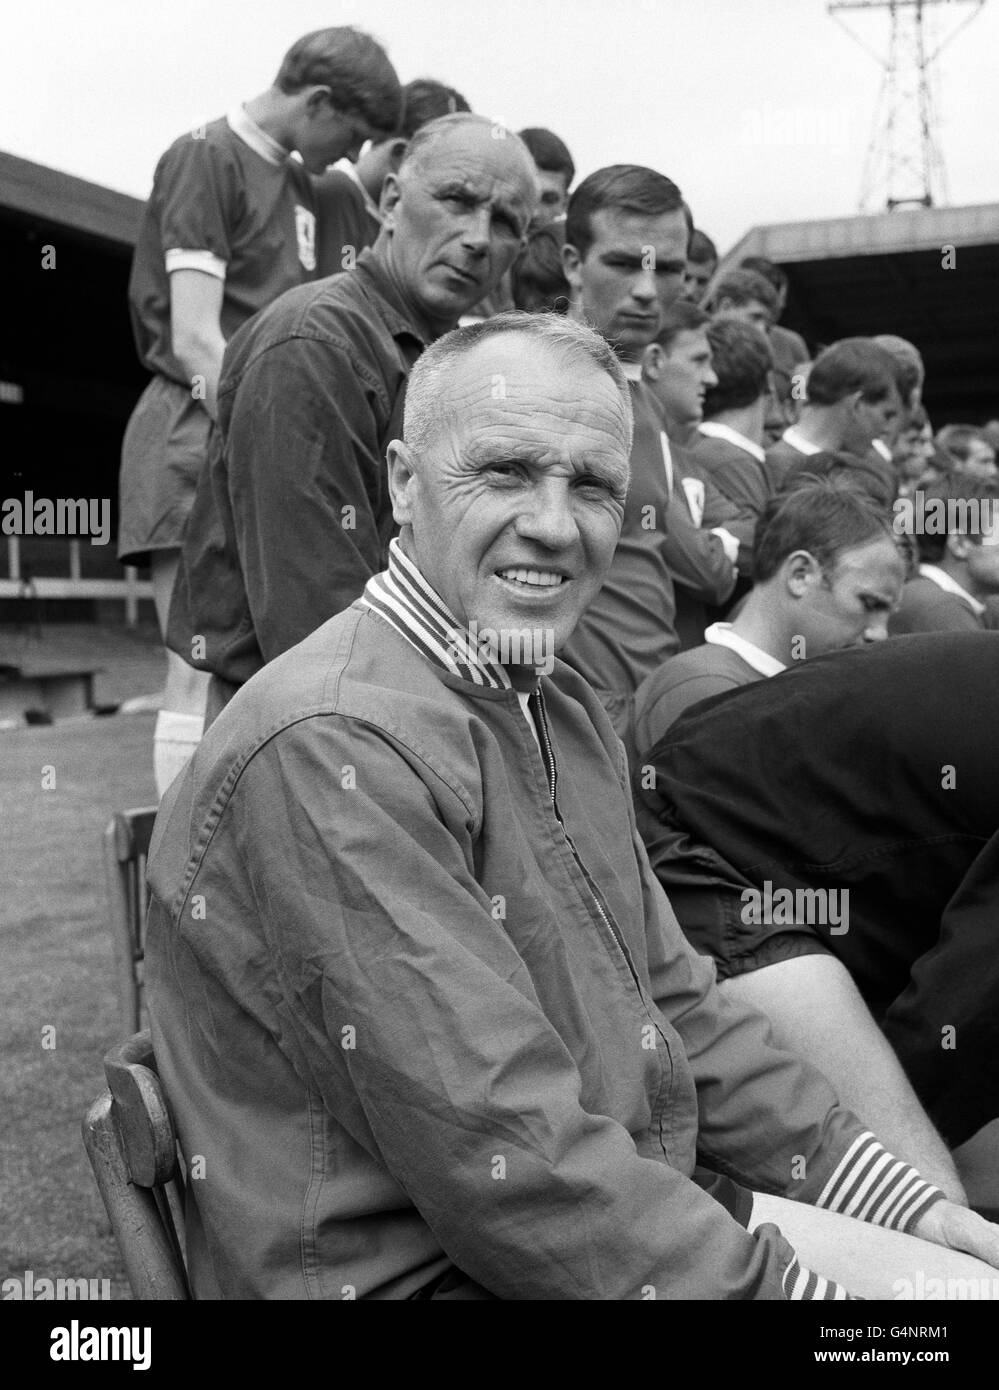 Soccer - League Division One - Liverpool Photocall - Bill Shankly - 1967. Bill Shankly, manager of Liverpool football club, during a team photocall in 1967. Stock Photo